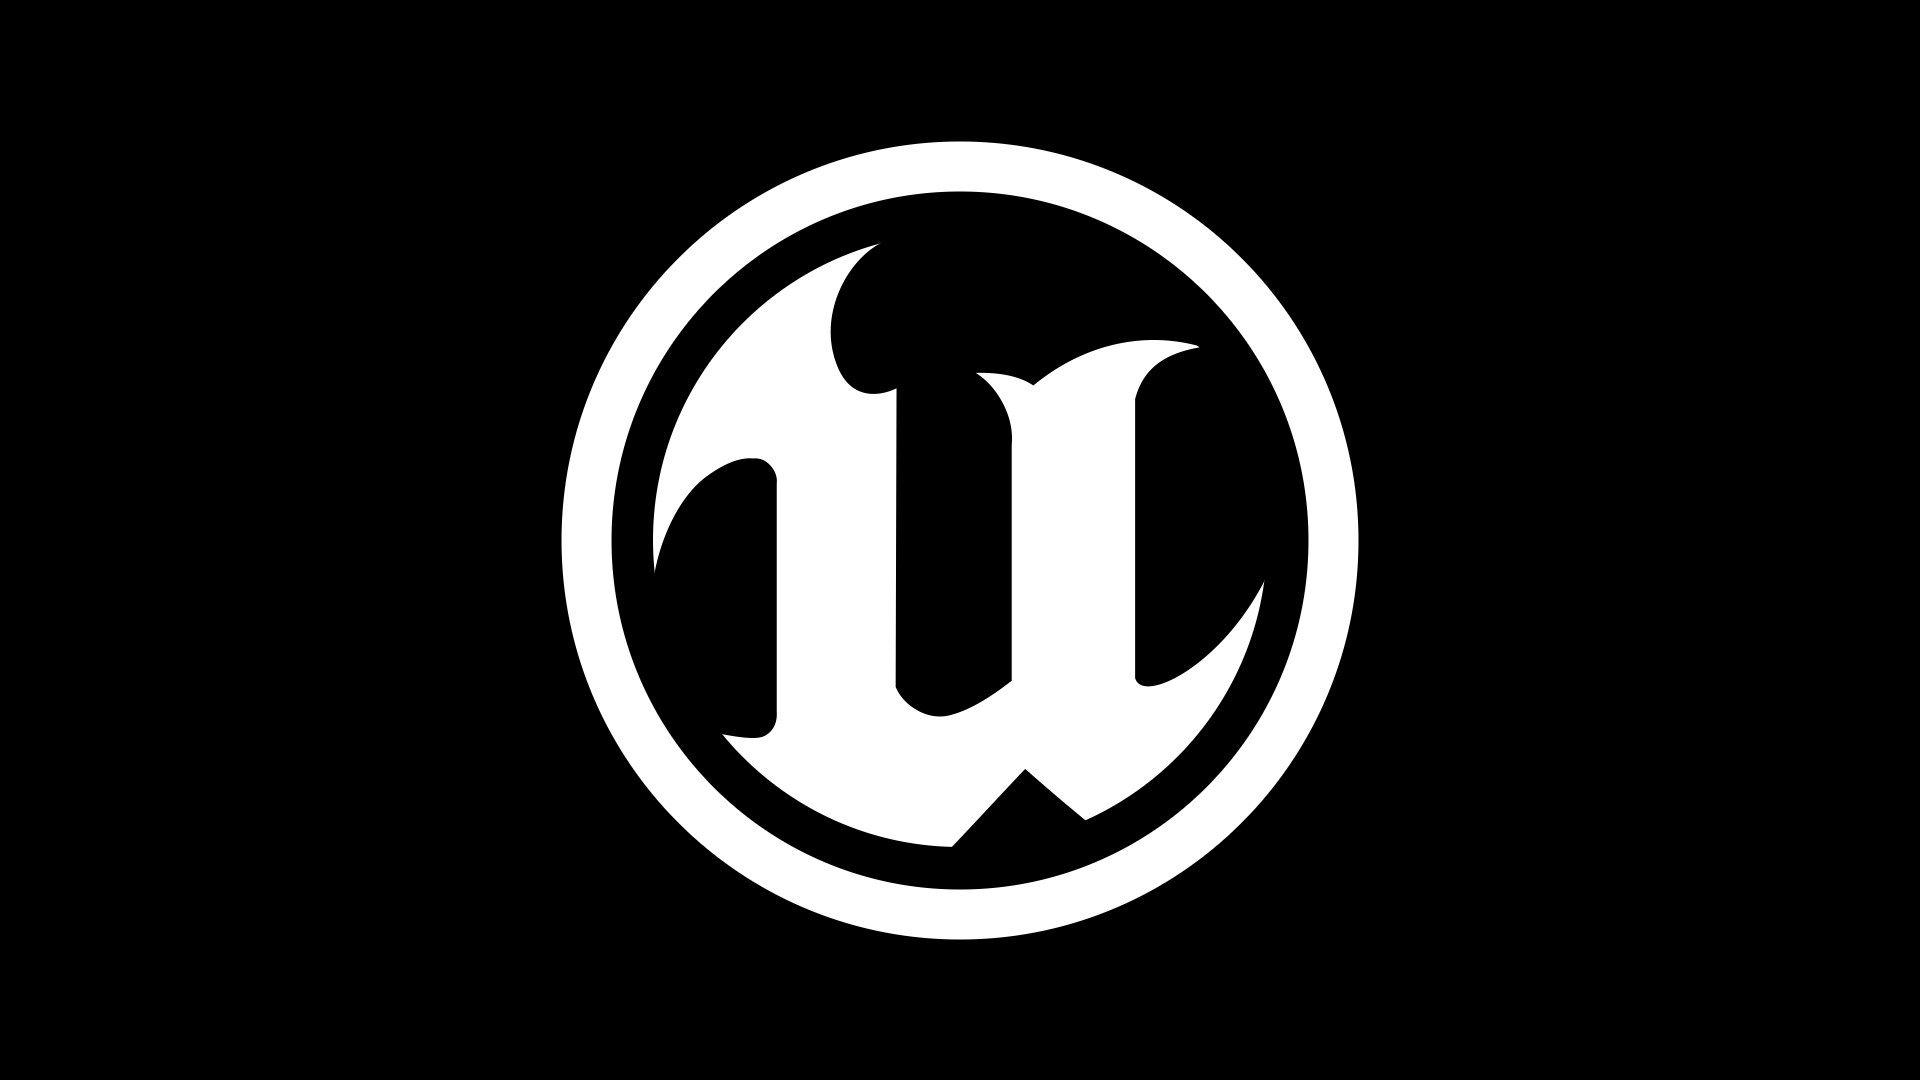 Unreal Logo - SUPER.COM Invests $50 Million on Unreal Engine Projects - DVS Gaming